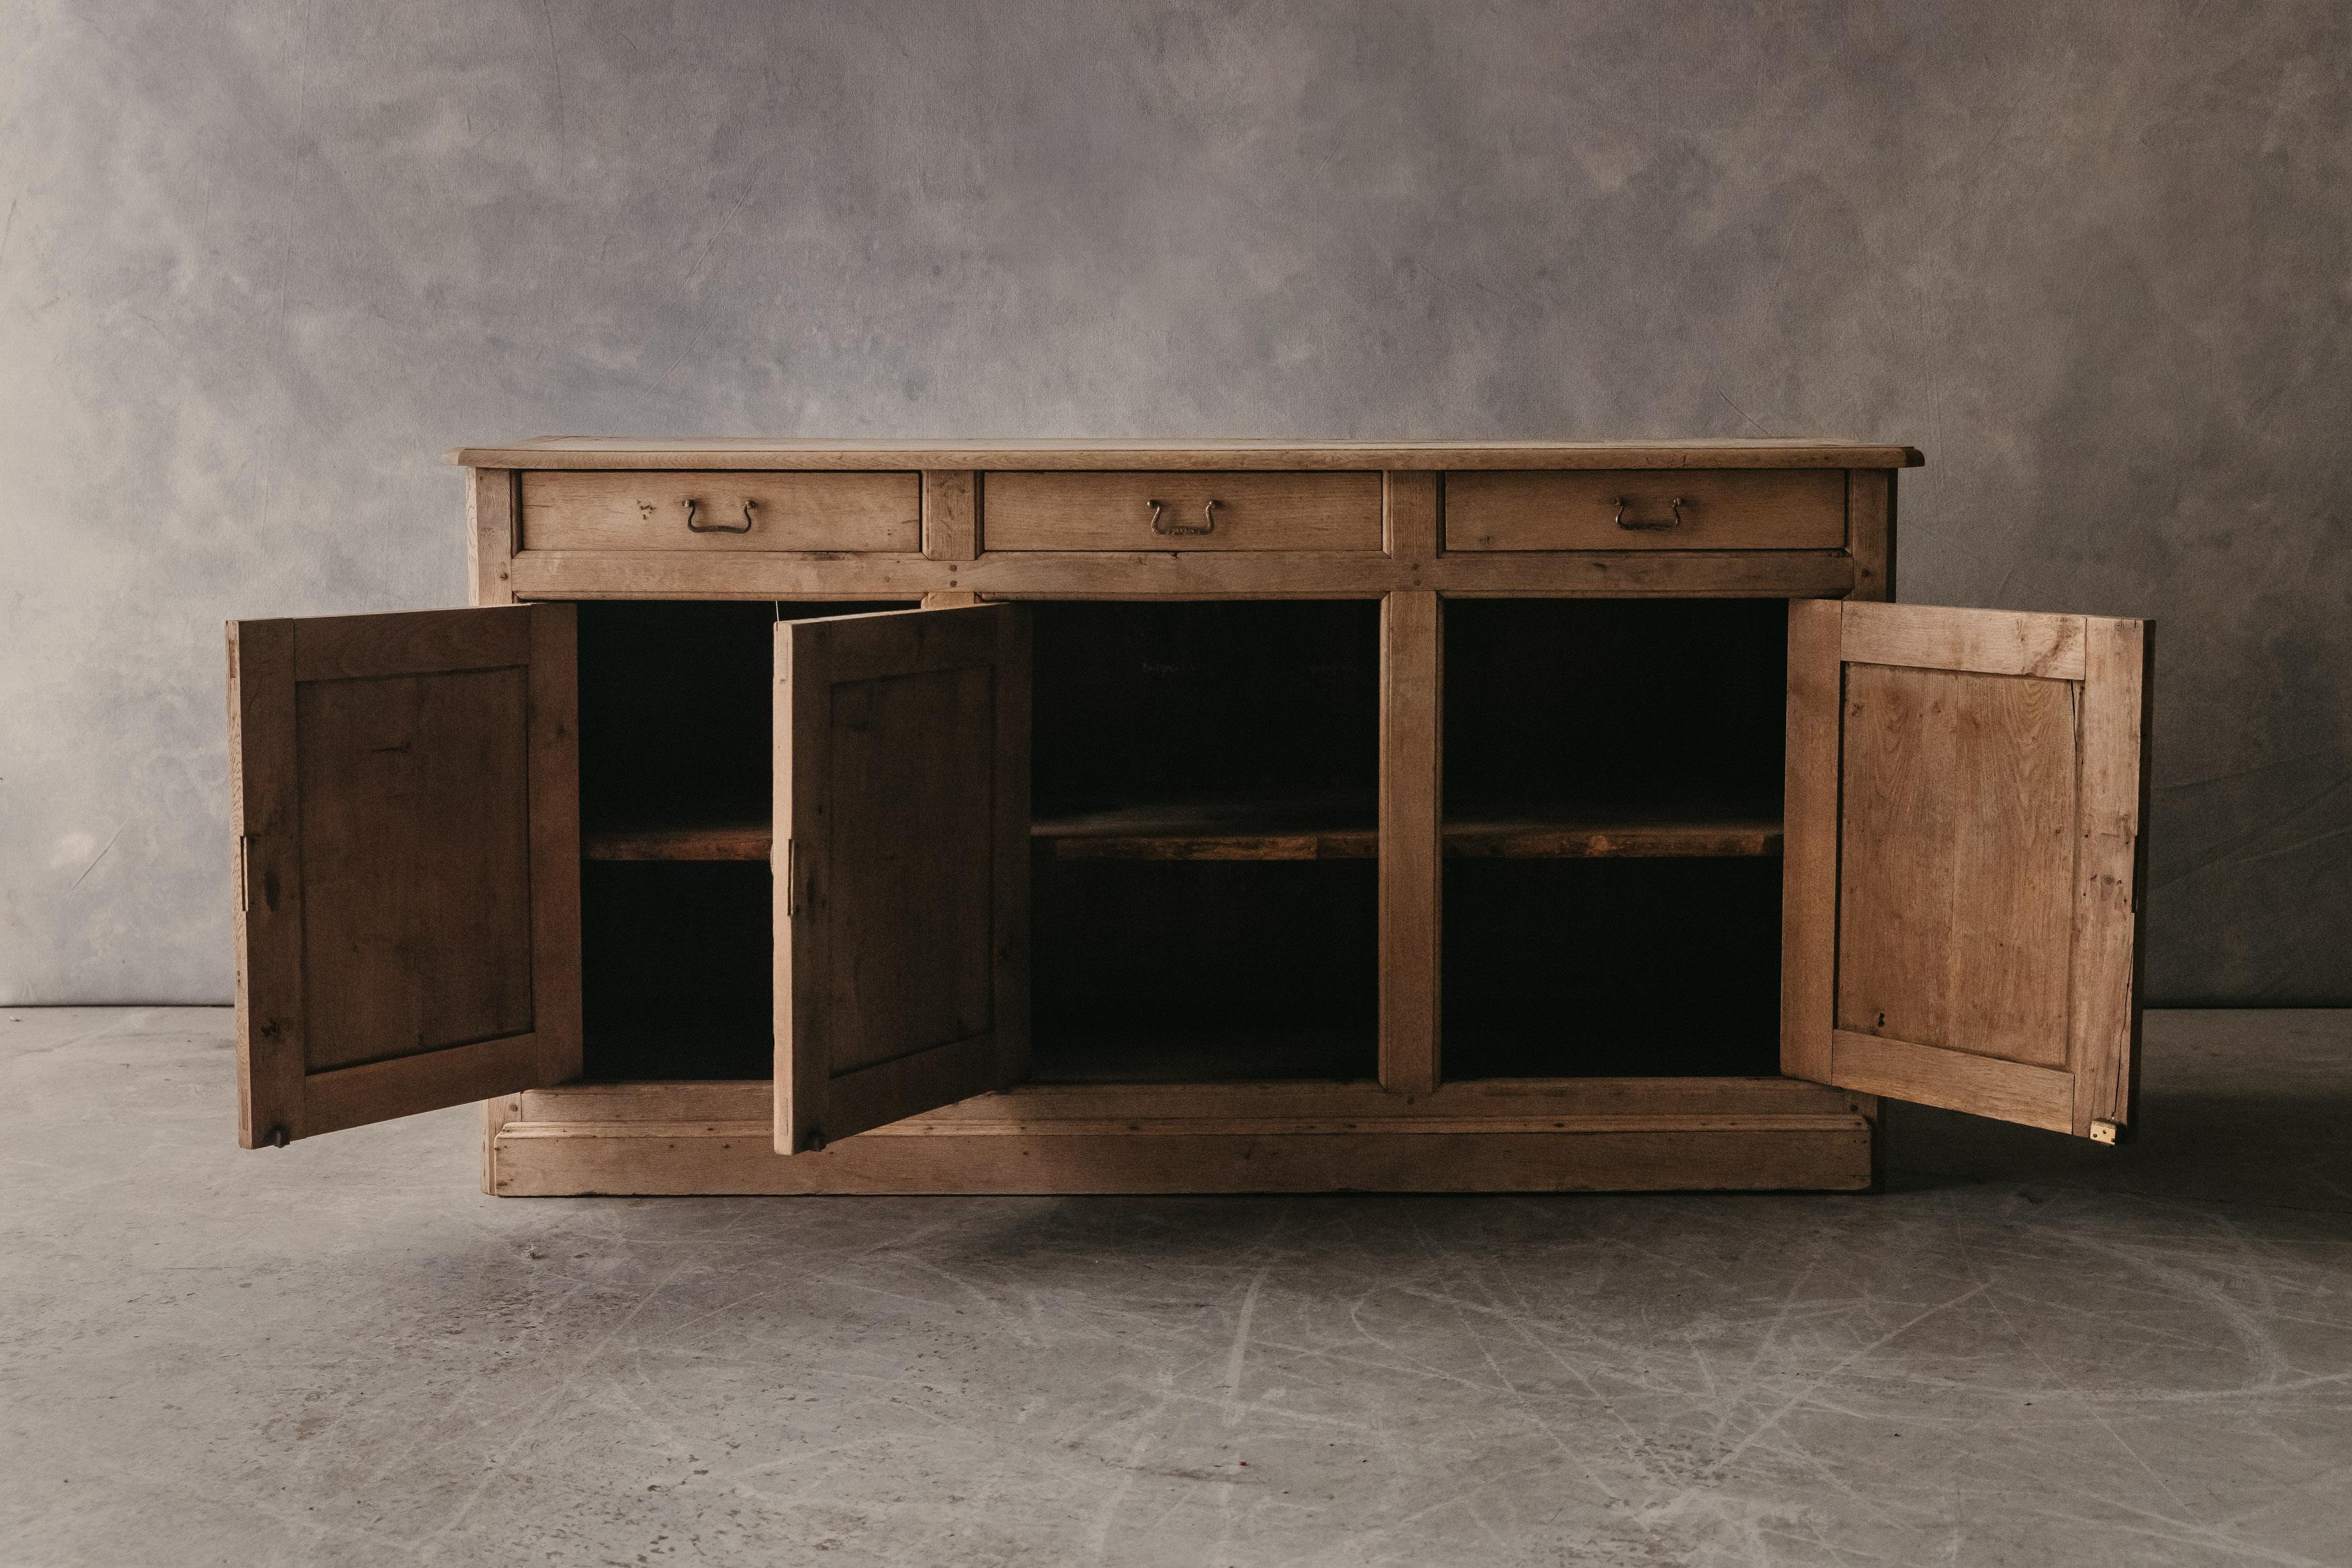 Vintage Oak Shop Counter From France, Circa 1940.  Solid oak construction with original brass hardware.  